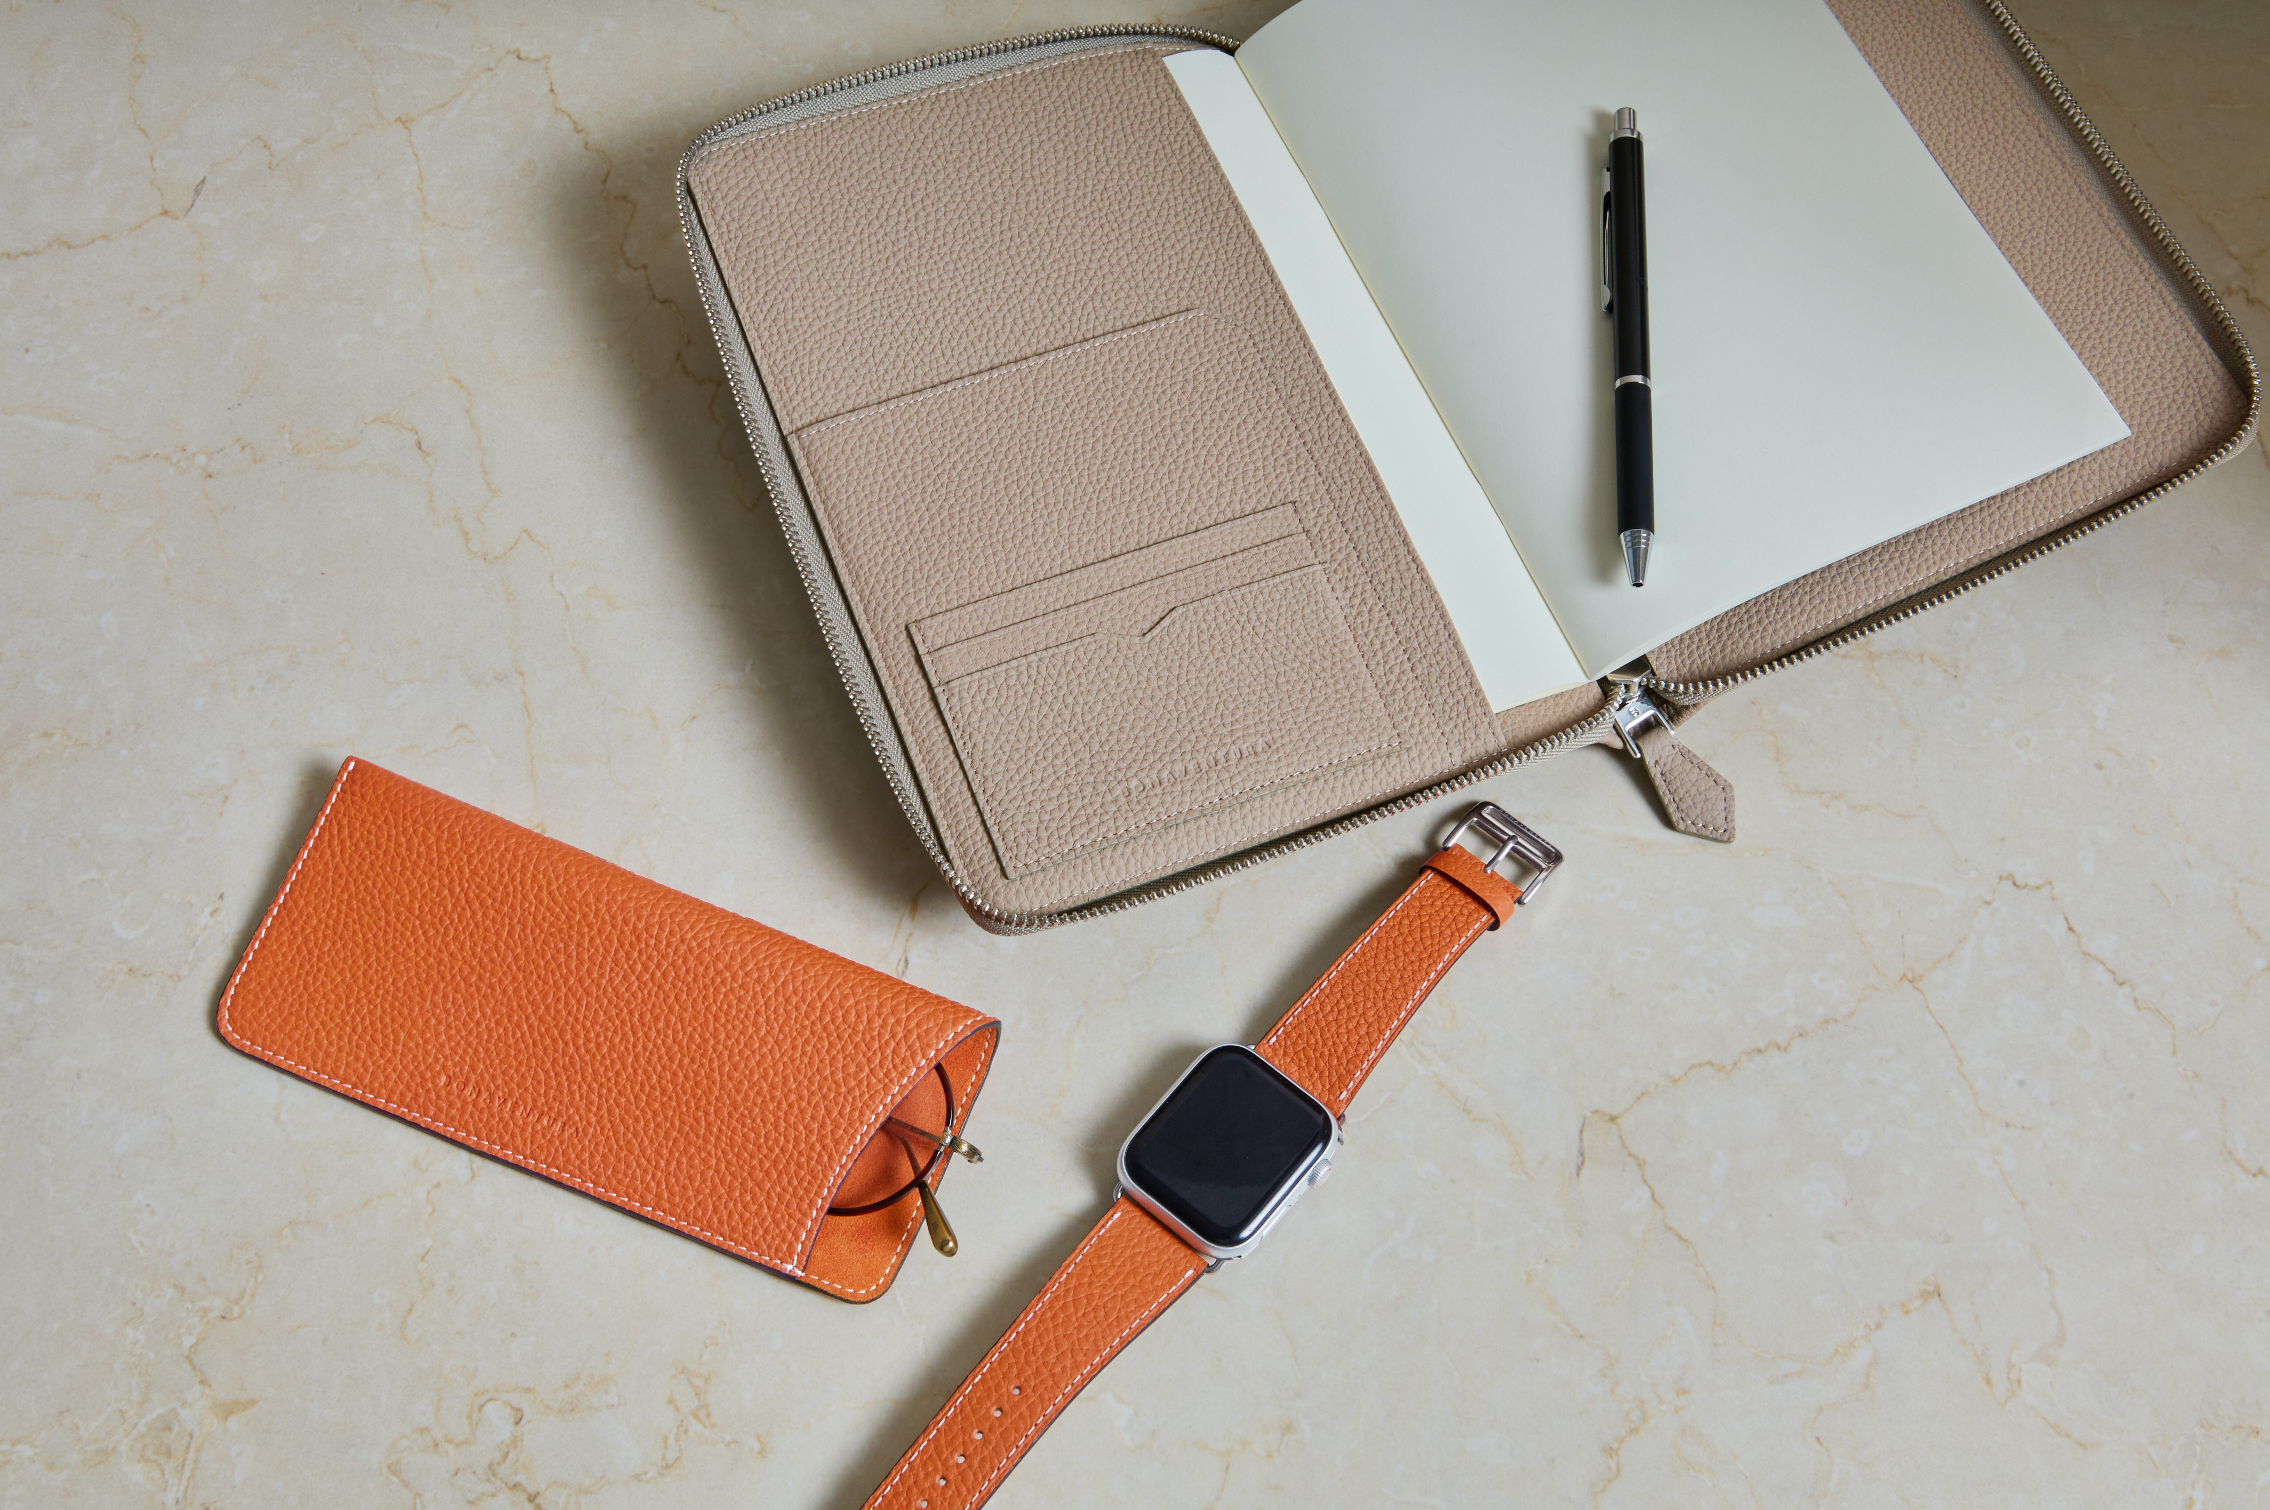 Various BONAVENTURA leather accessories for gadgets and business meetings stylishly arranged on a desk.